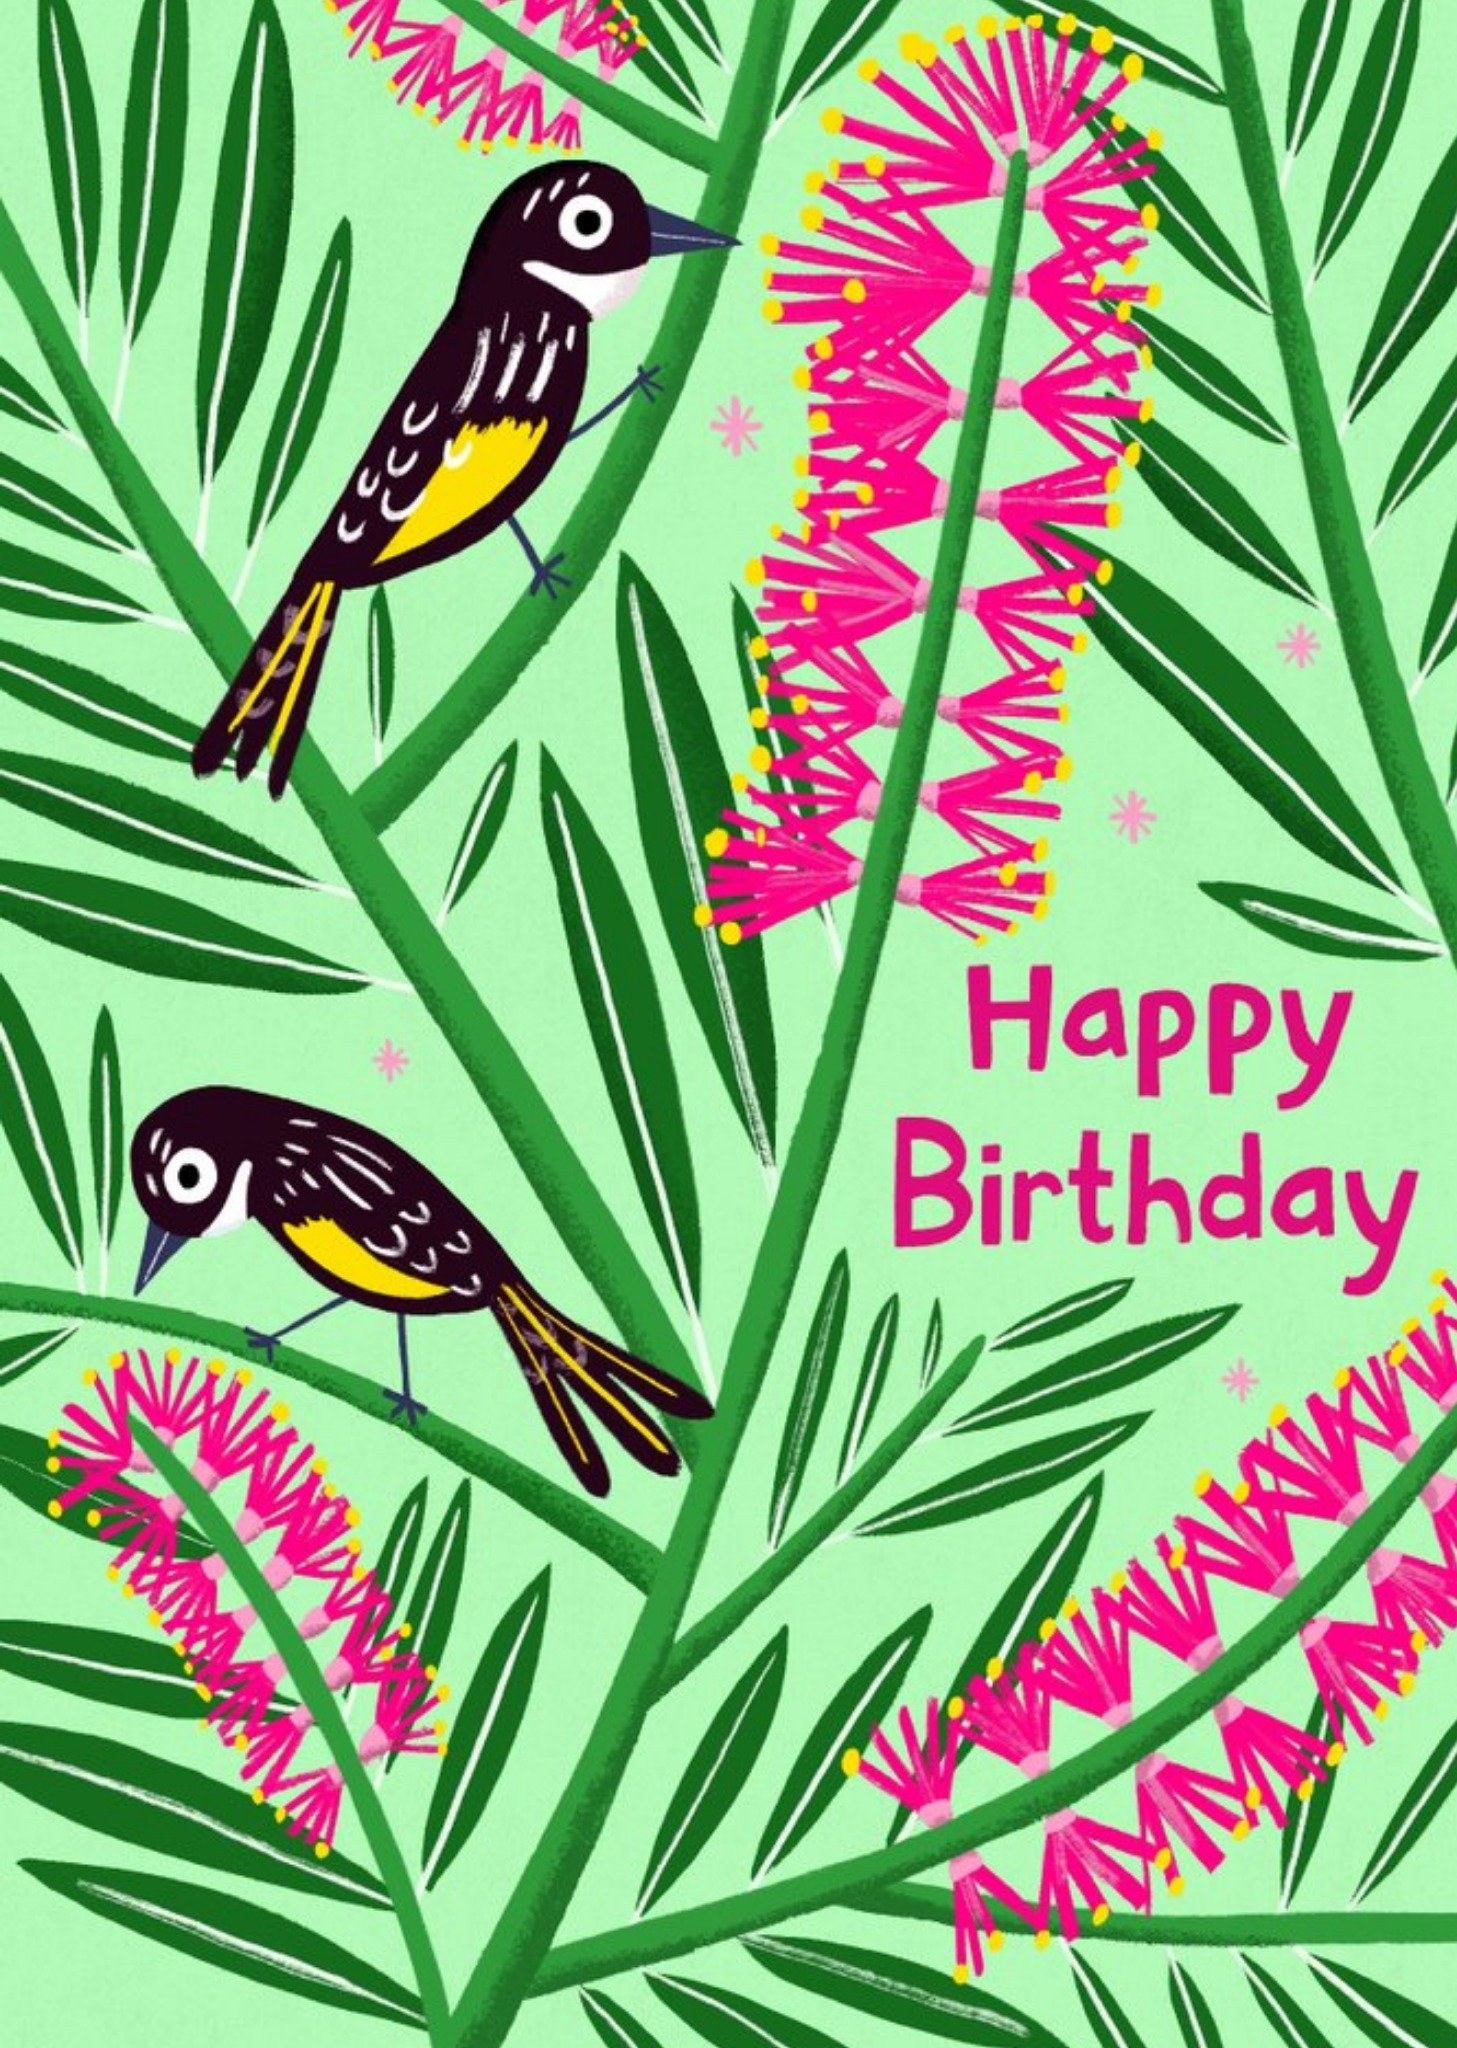 Moonpig Vibrant Iilustration Of A Pair Of Honeyeaters Perched In A Bottle Brush Tree Birthday Card, 